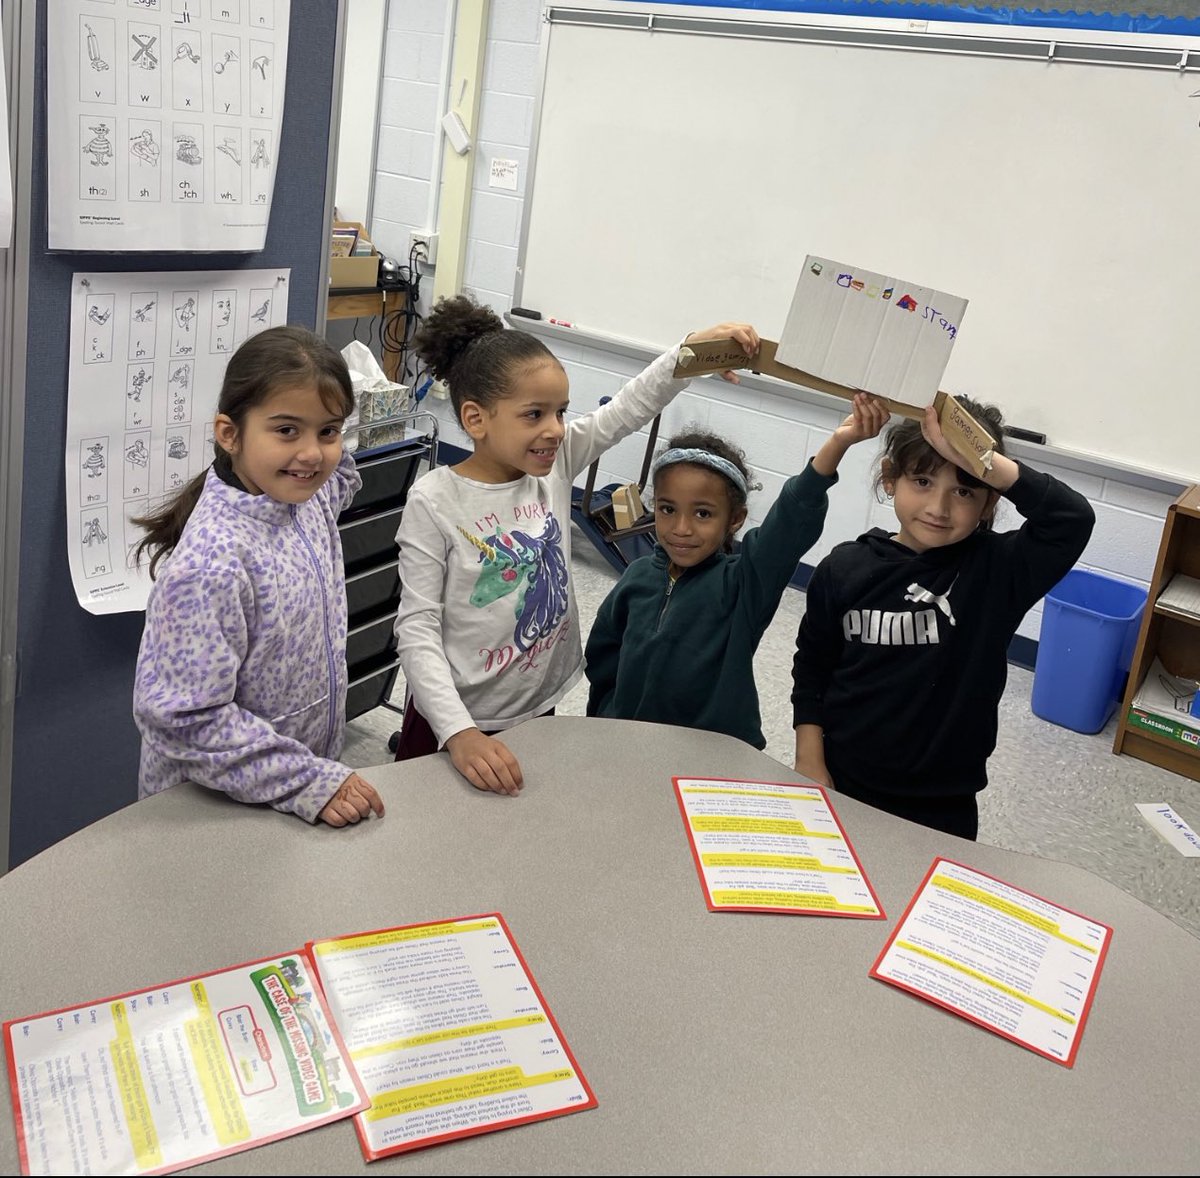 Our PALS tutors are awesome! Here’s one of Mrs. Benjamin’s first grade groups practicing fluency using reader’s theater. They loved it! ❤️ @WestridgePRIDE @pwcsela